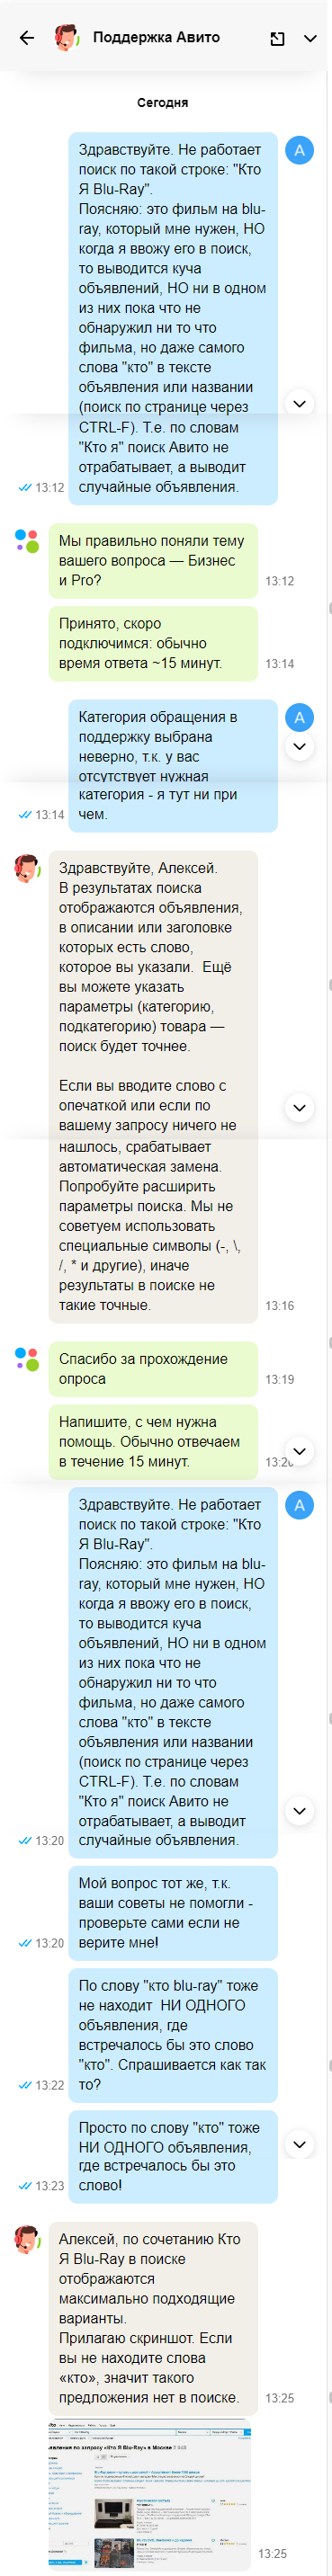 Search on Avito (avito.ru) works incorrectly: you enter a word, but you get a bunch of ads without mentioning this word - My, Avito, Announcement on avito, Announcement, Support service, Longpost